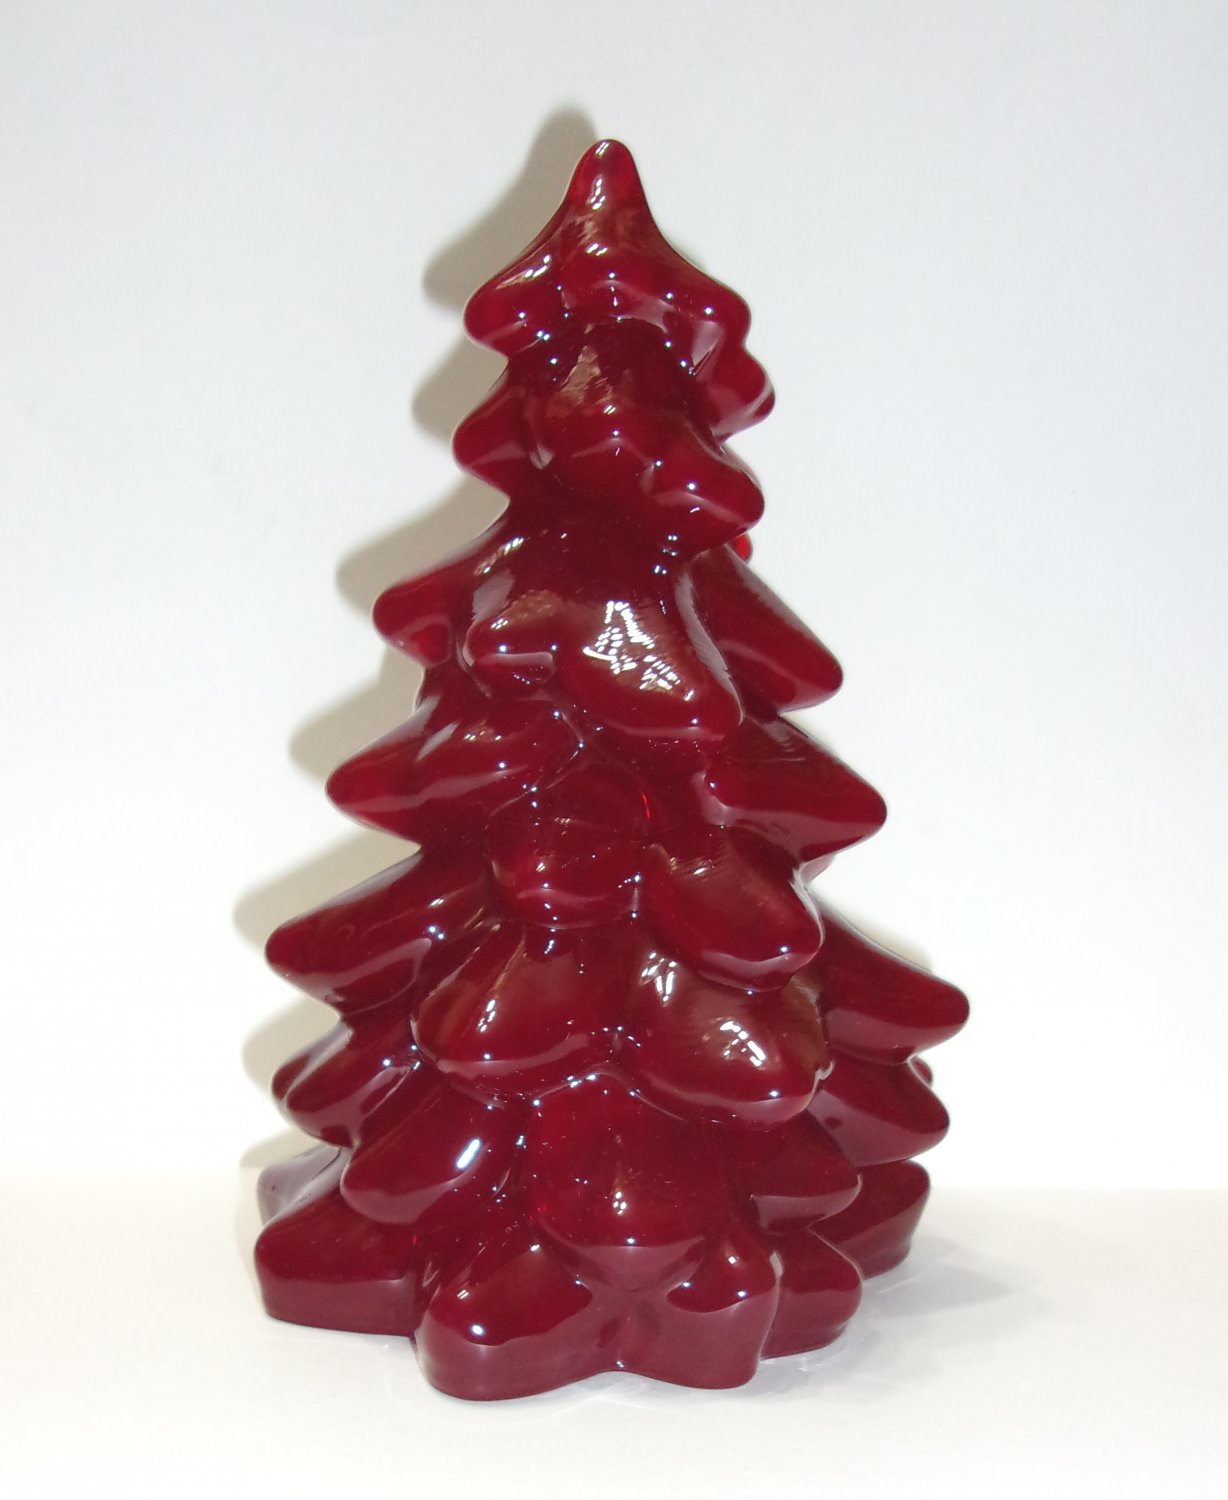 Mosser Glass Dark Ruby Red Large 8" Christmas Tree Figurine Holiday Made In USA